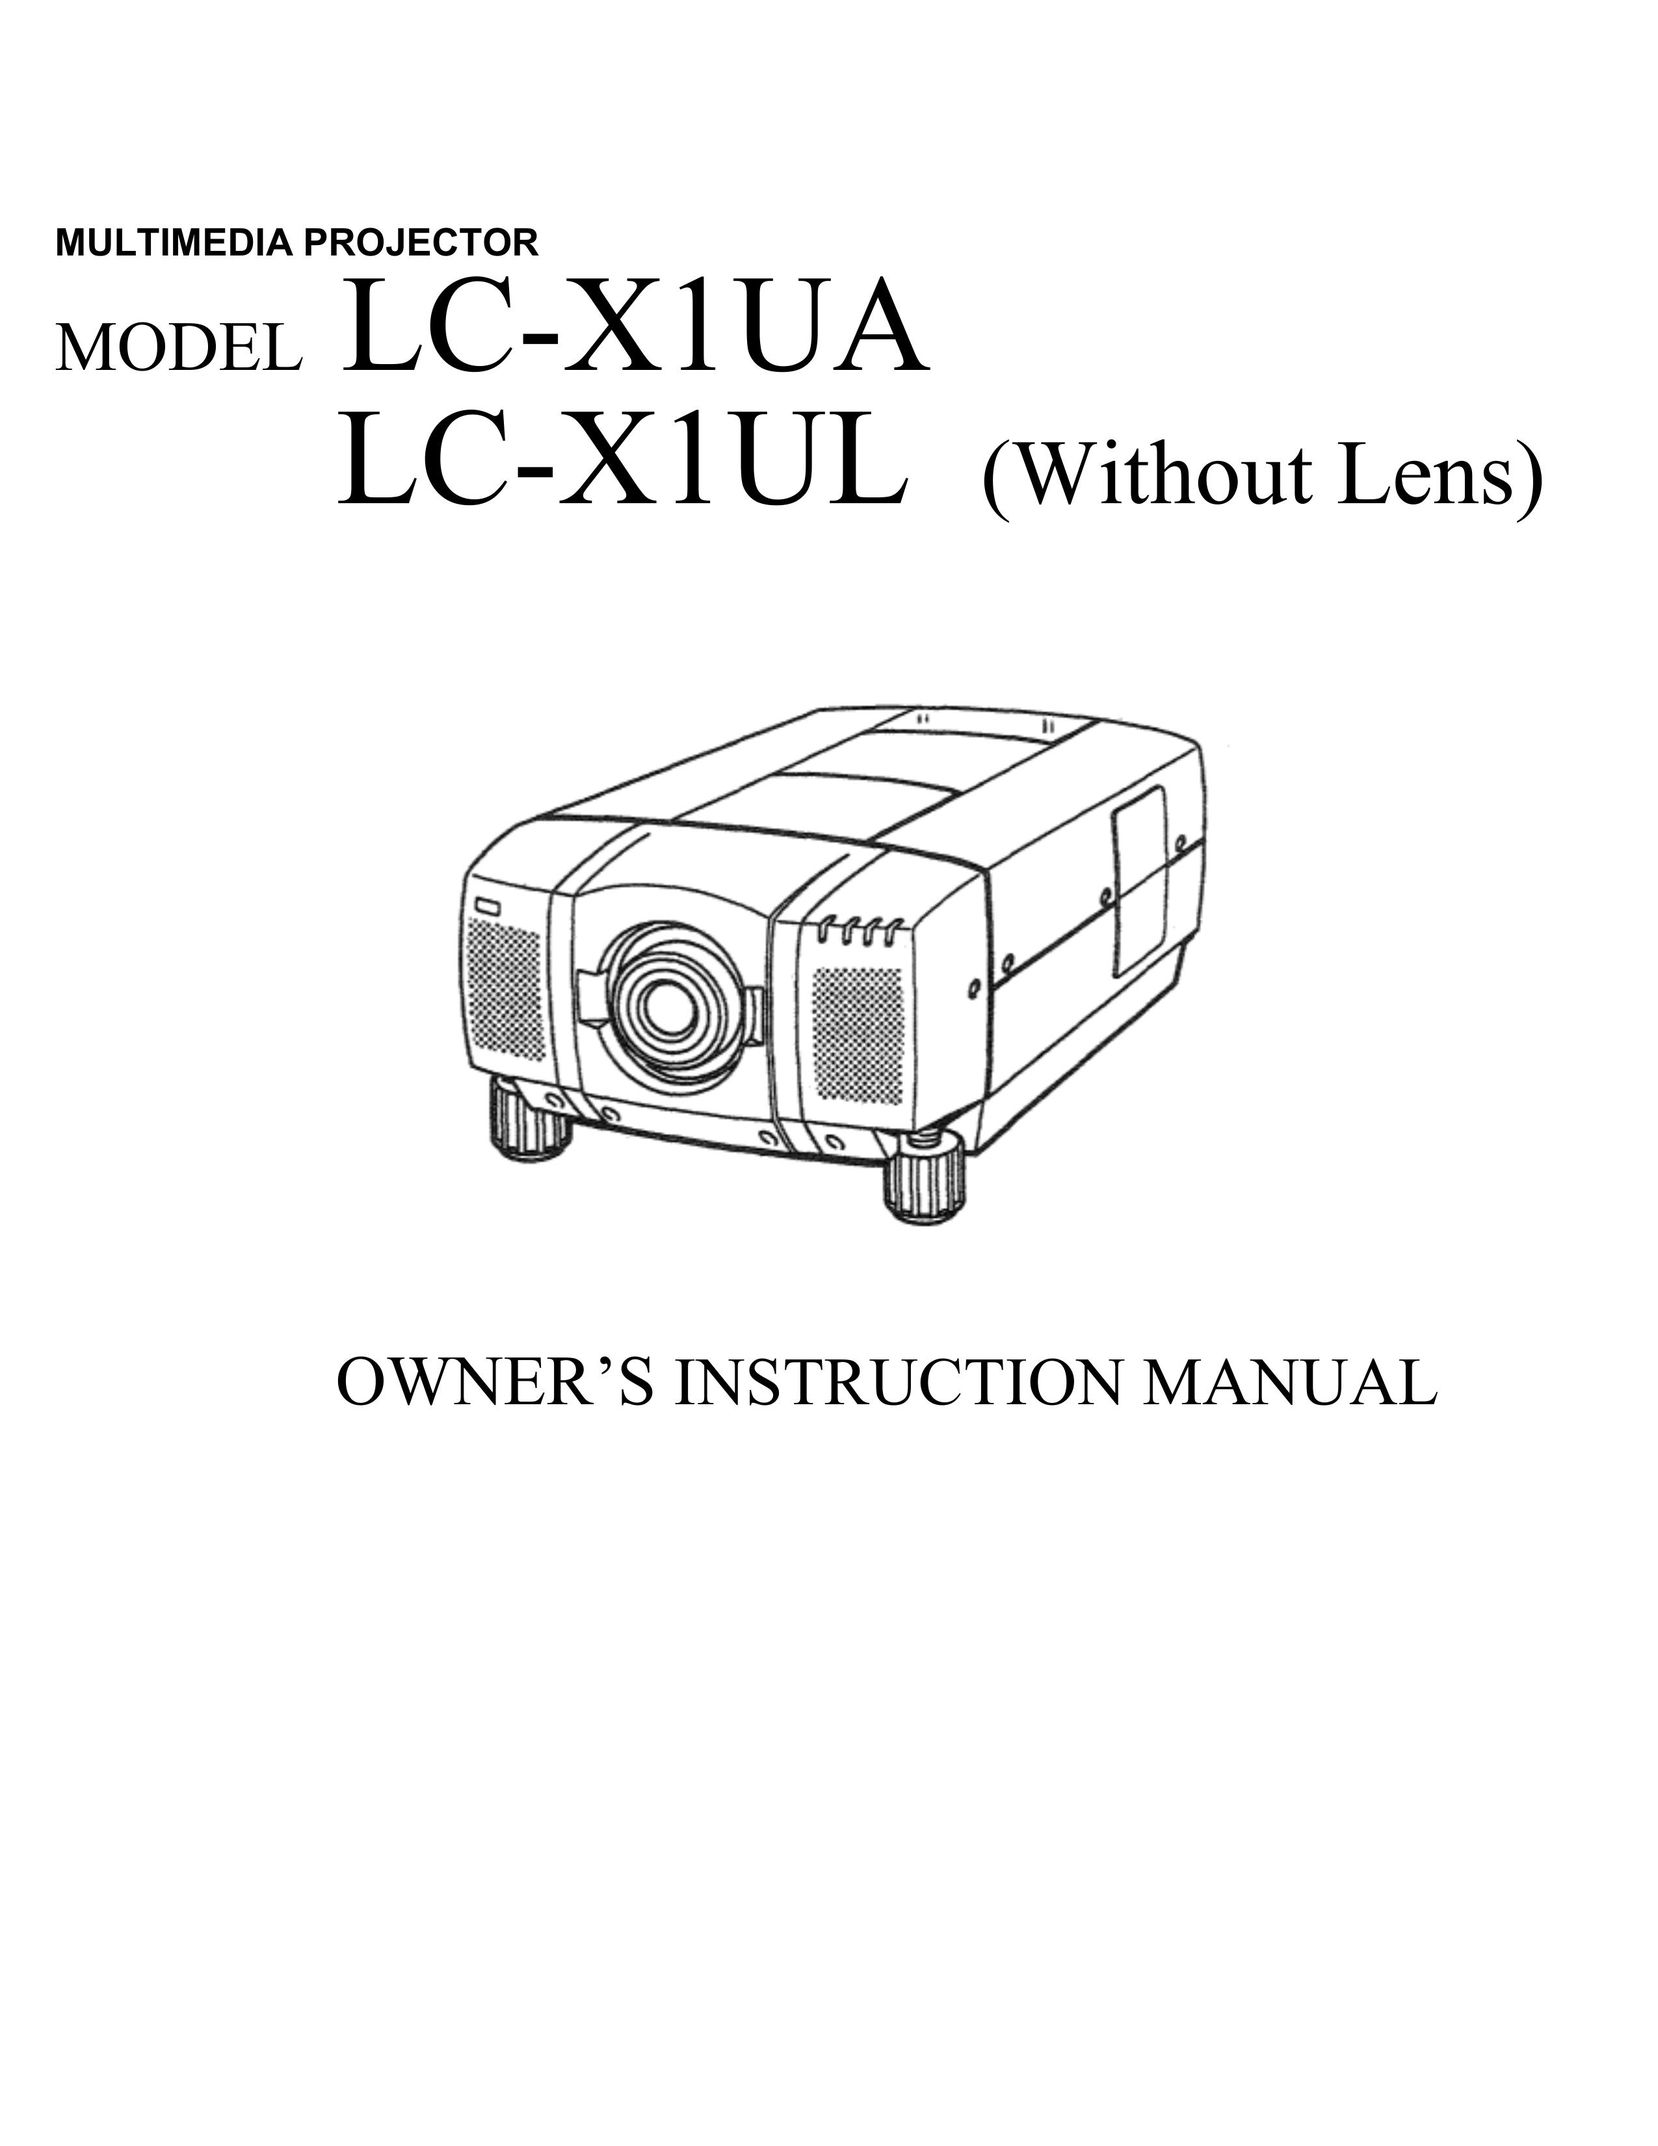 Eiki LC-X1UL Projection Television User Manual